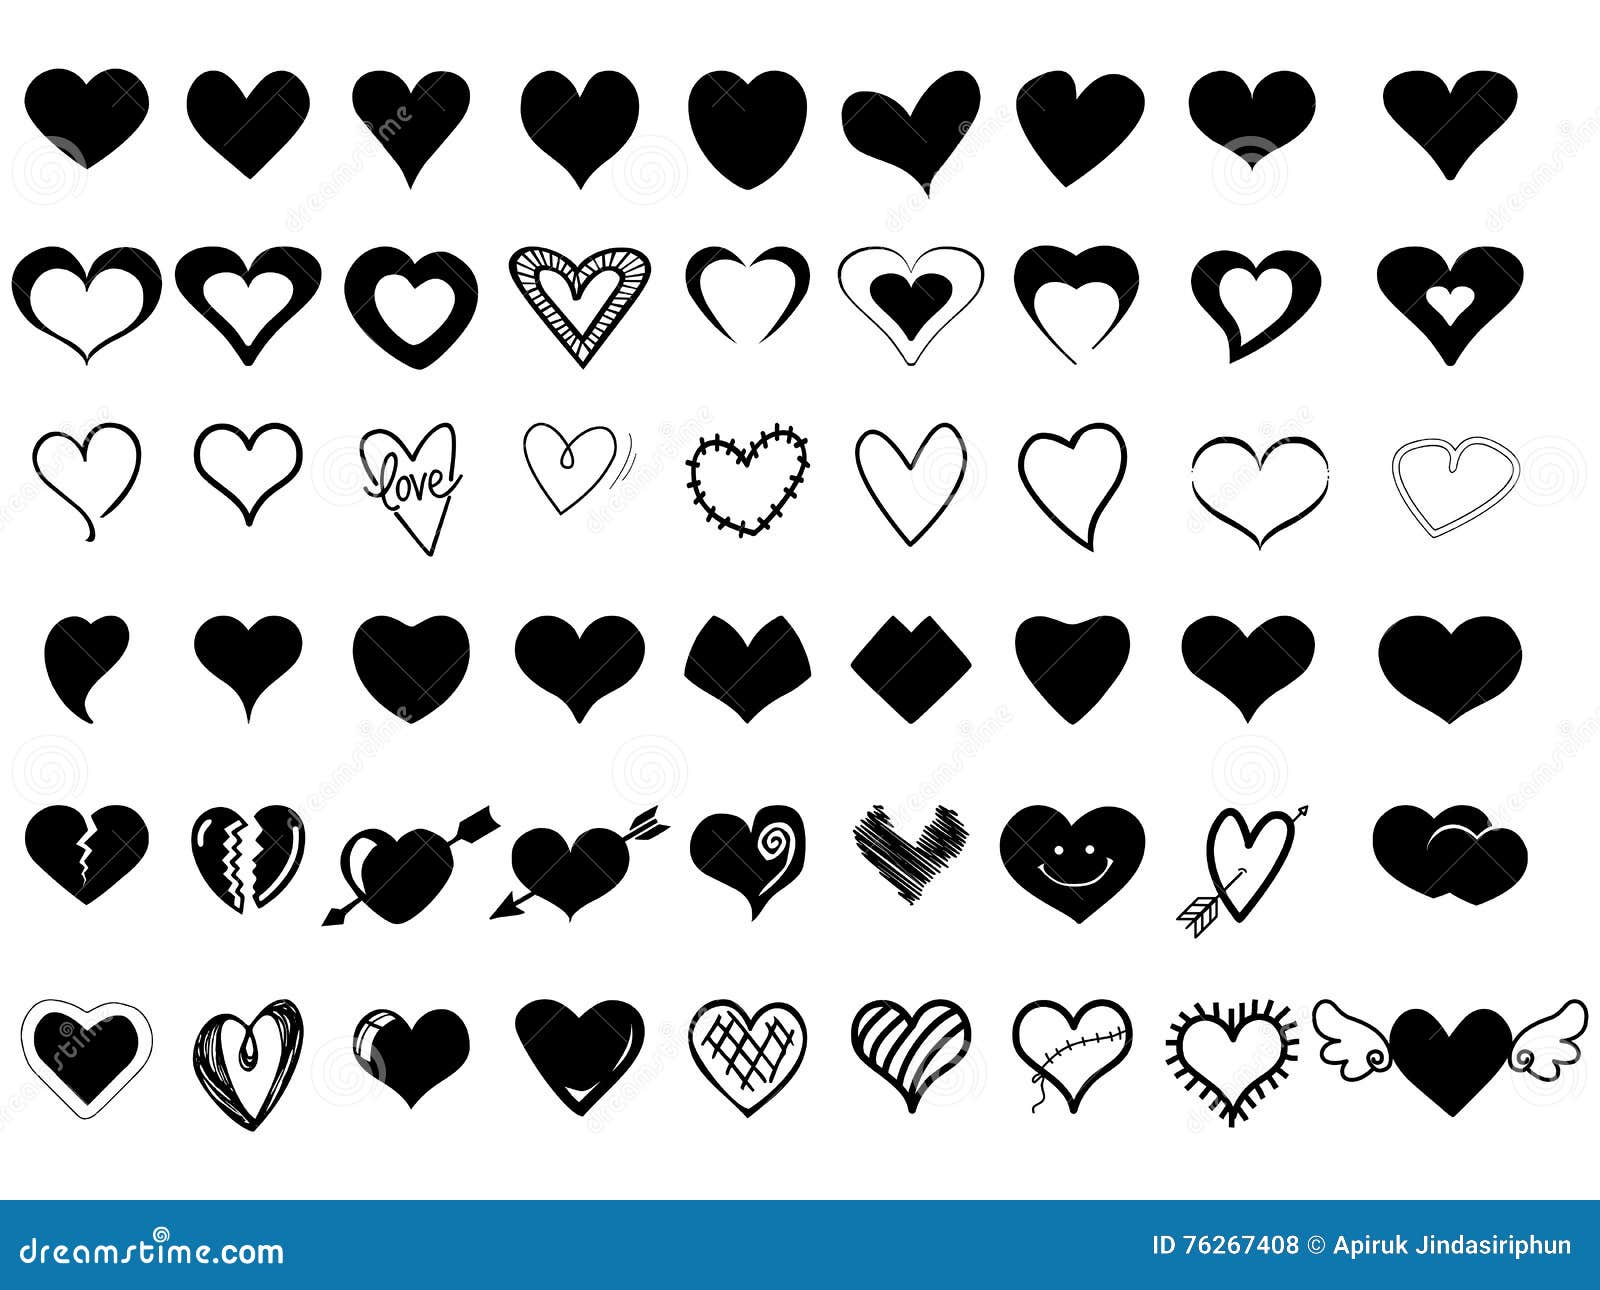 heart icons